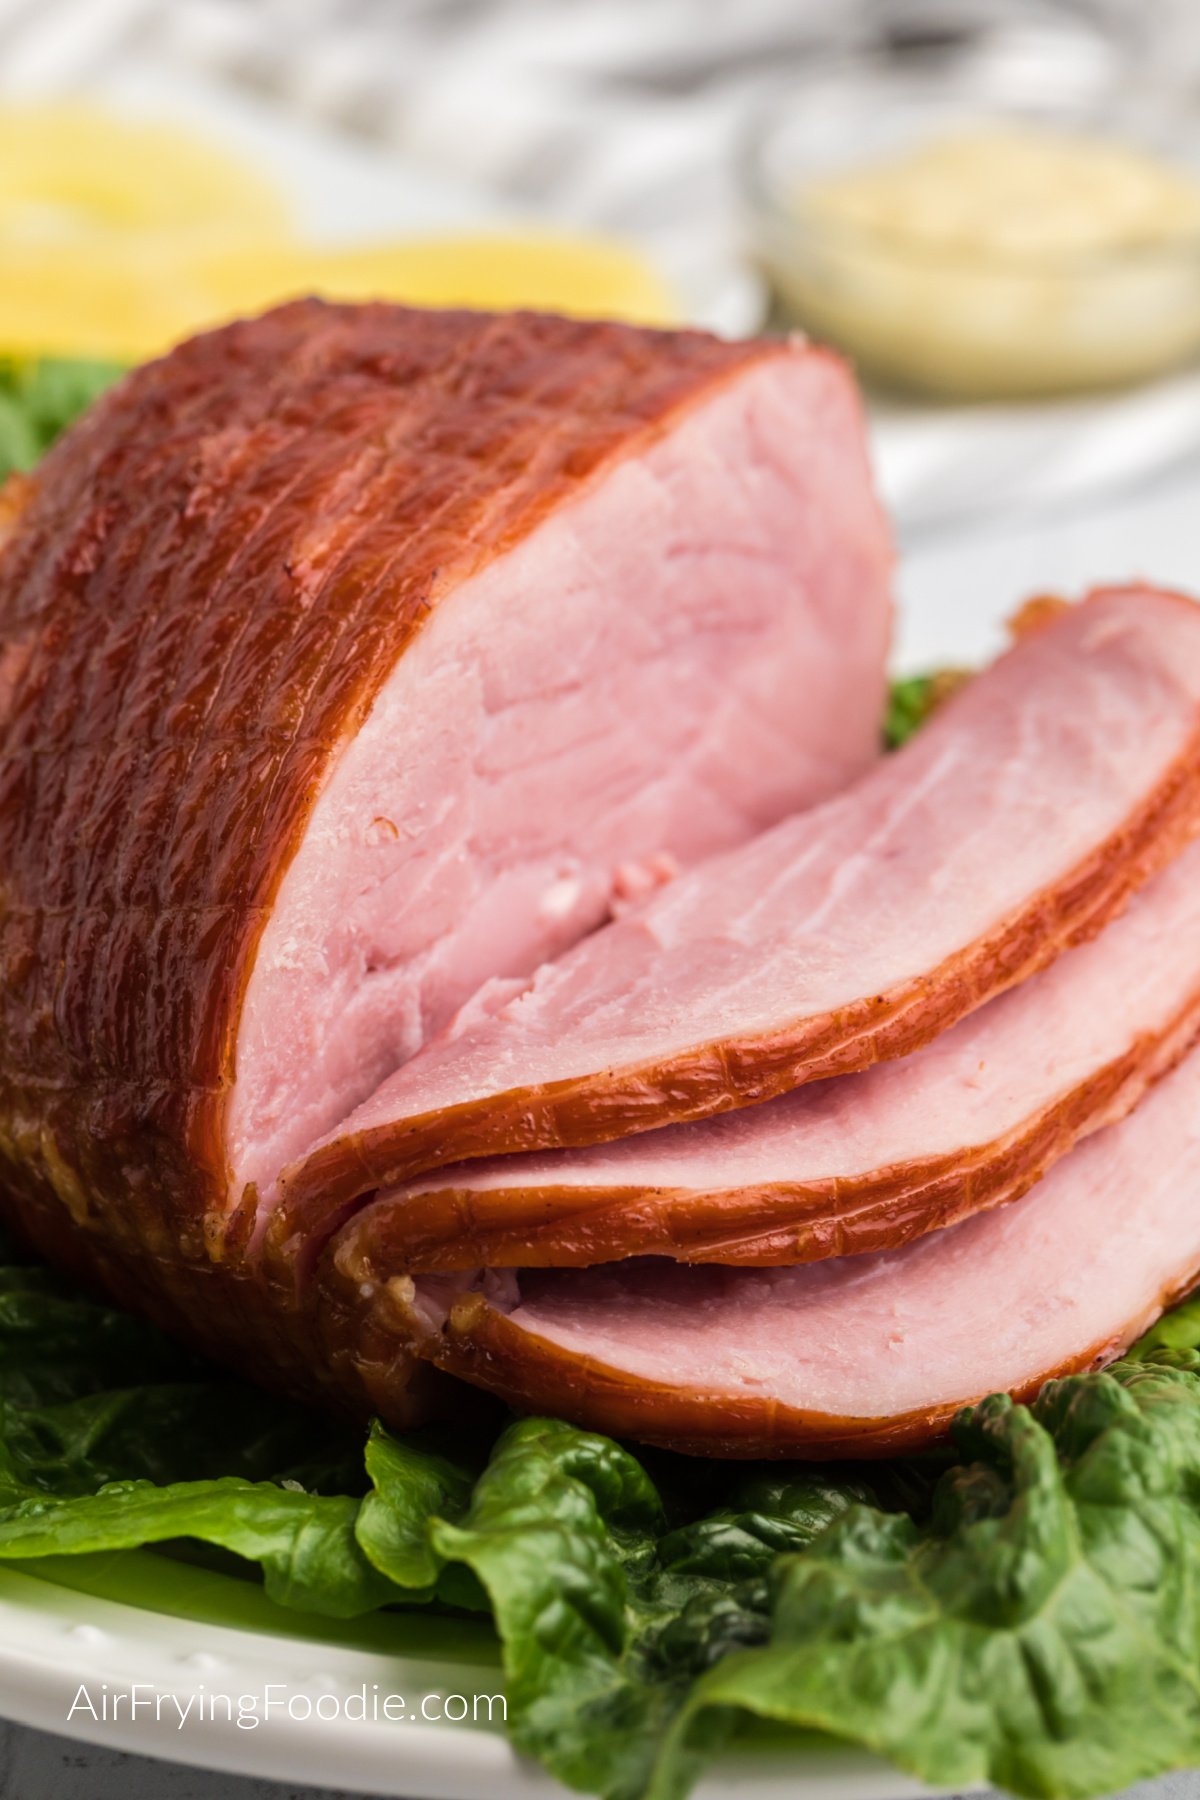 Fully cooked air fryer ham on a plate, sliced, and ready to serve.